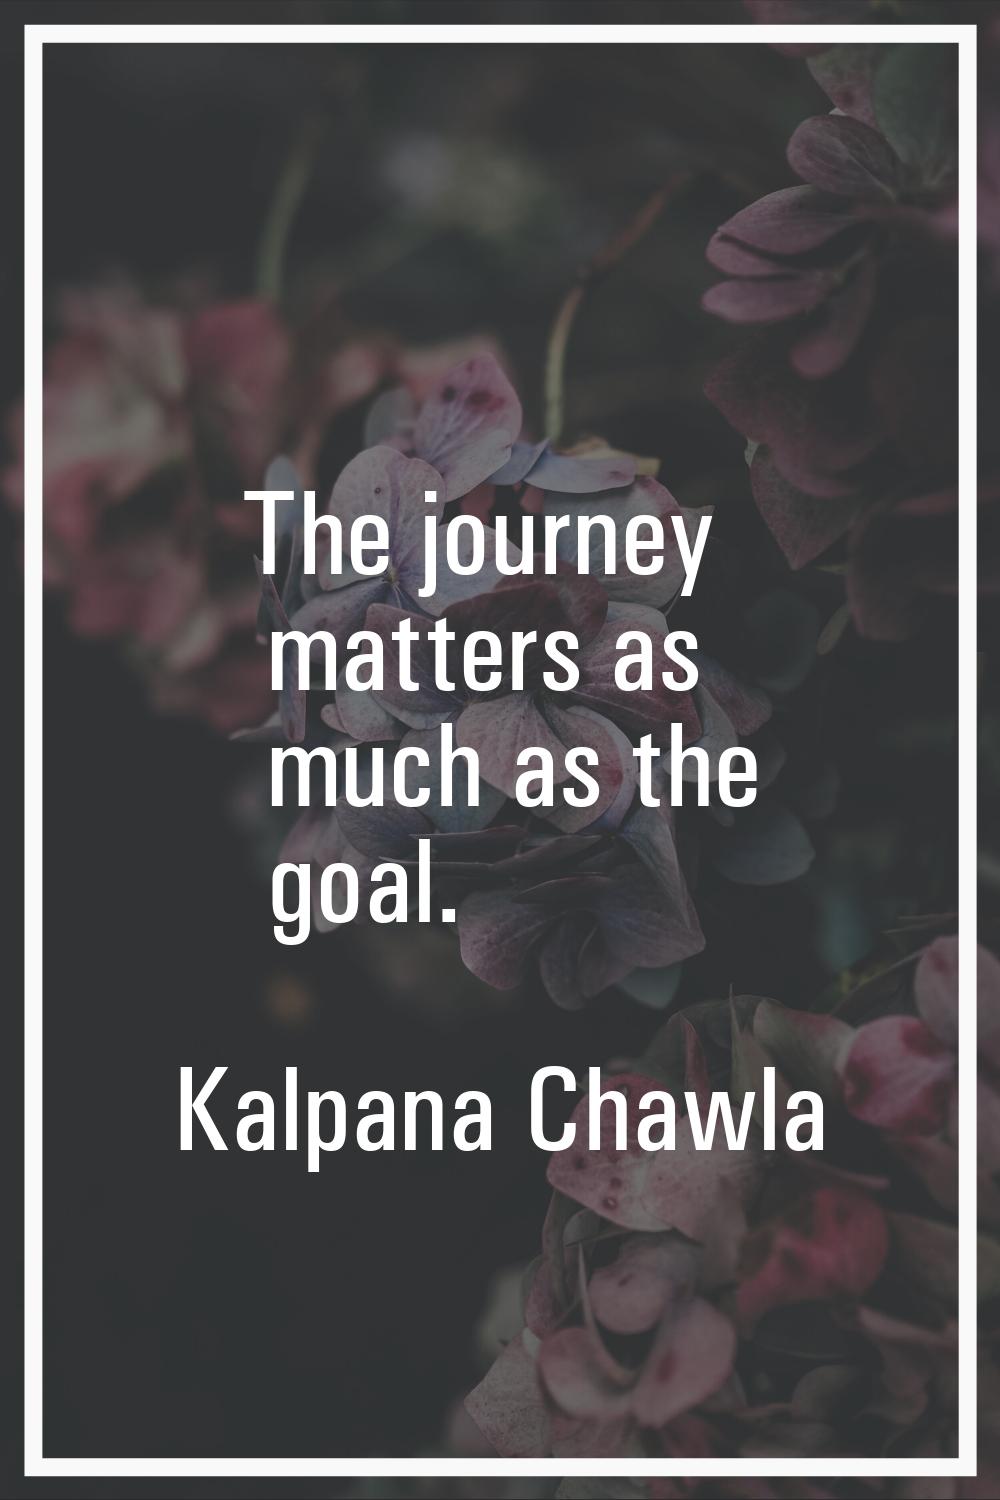 The journey matters as much as the goal.